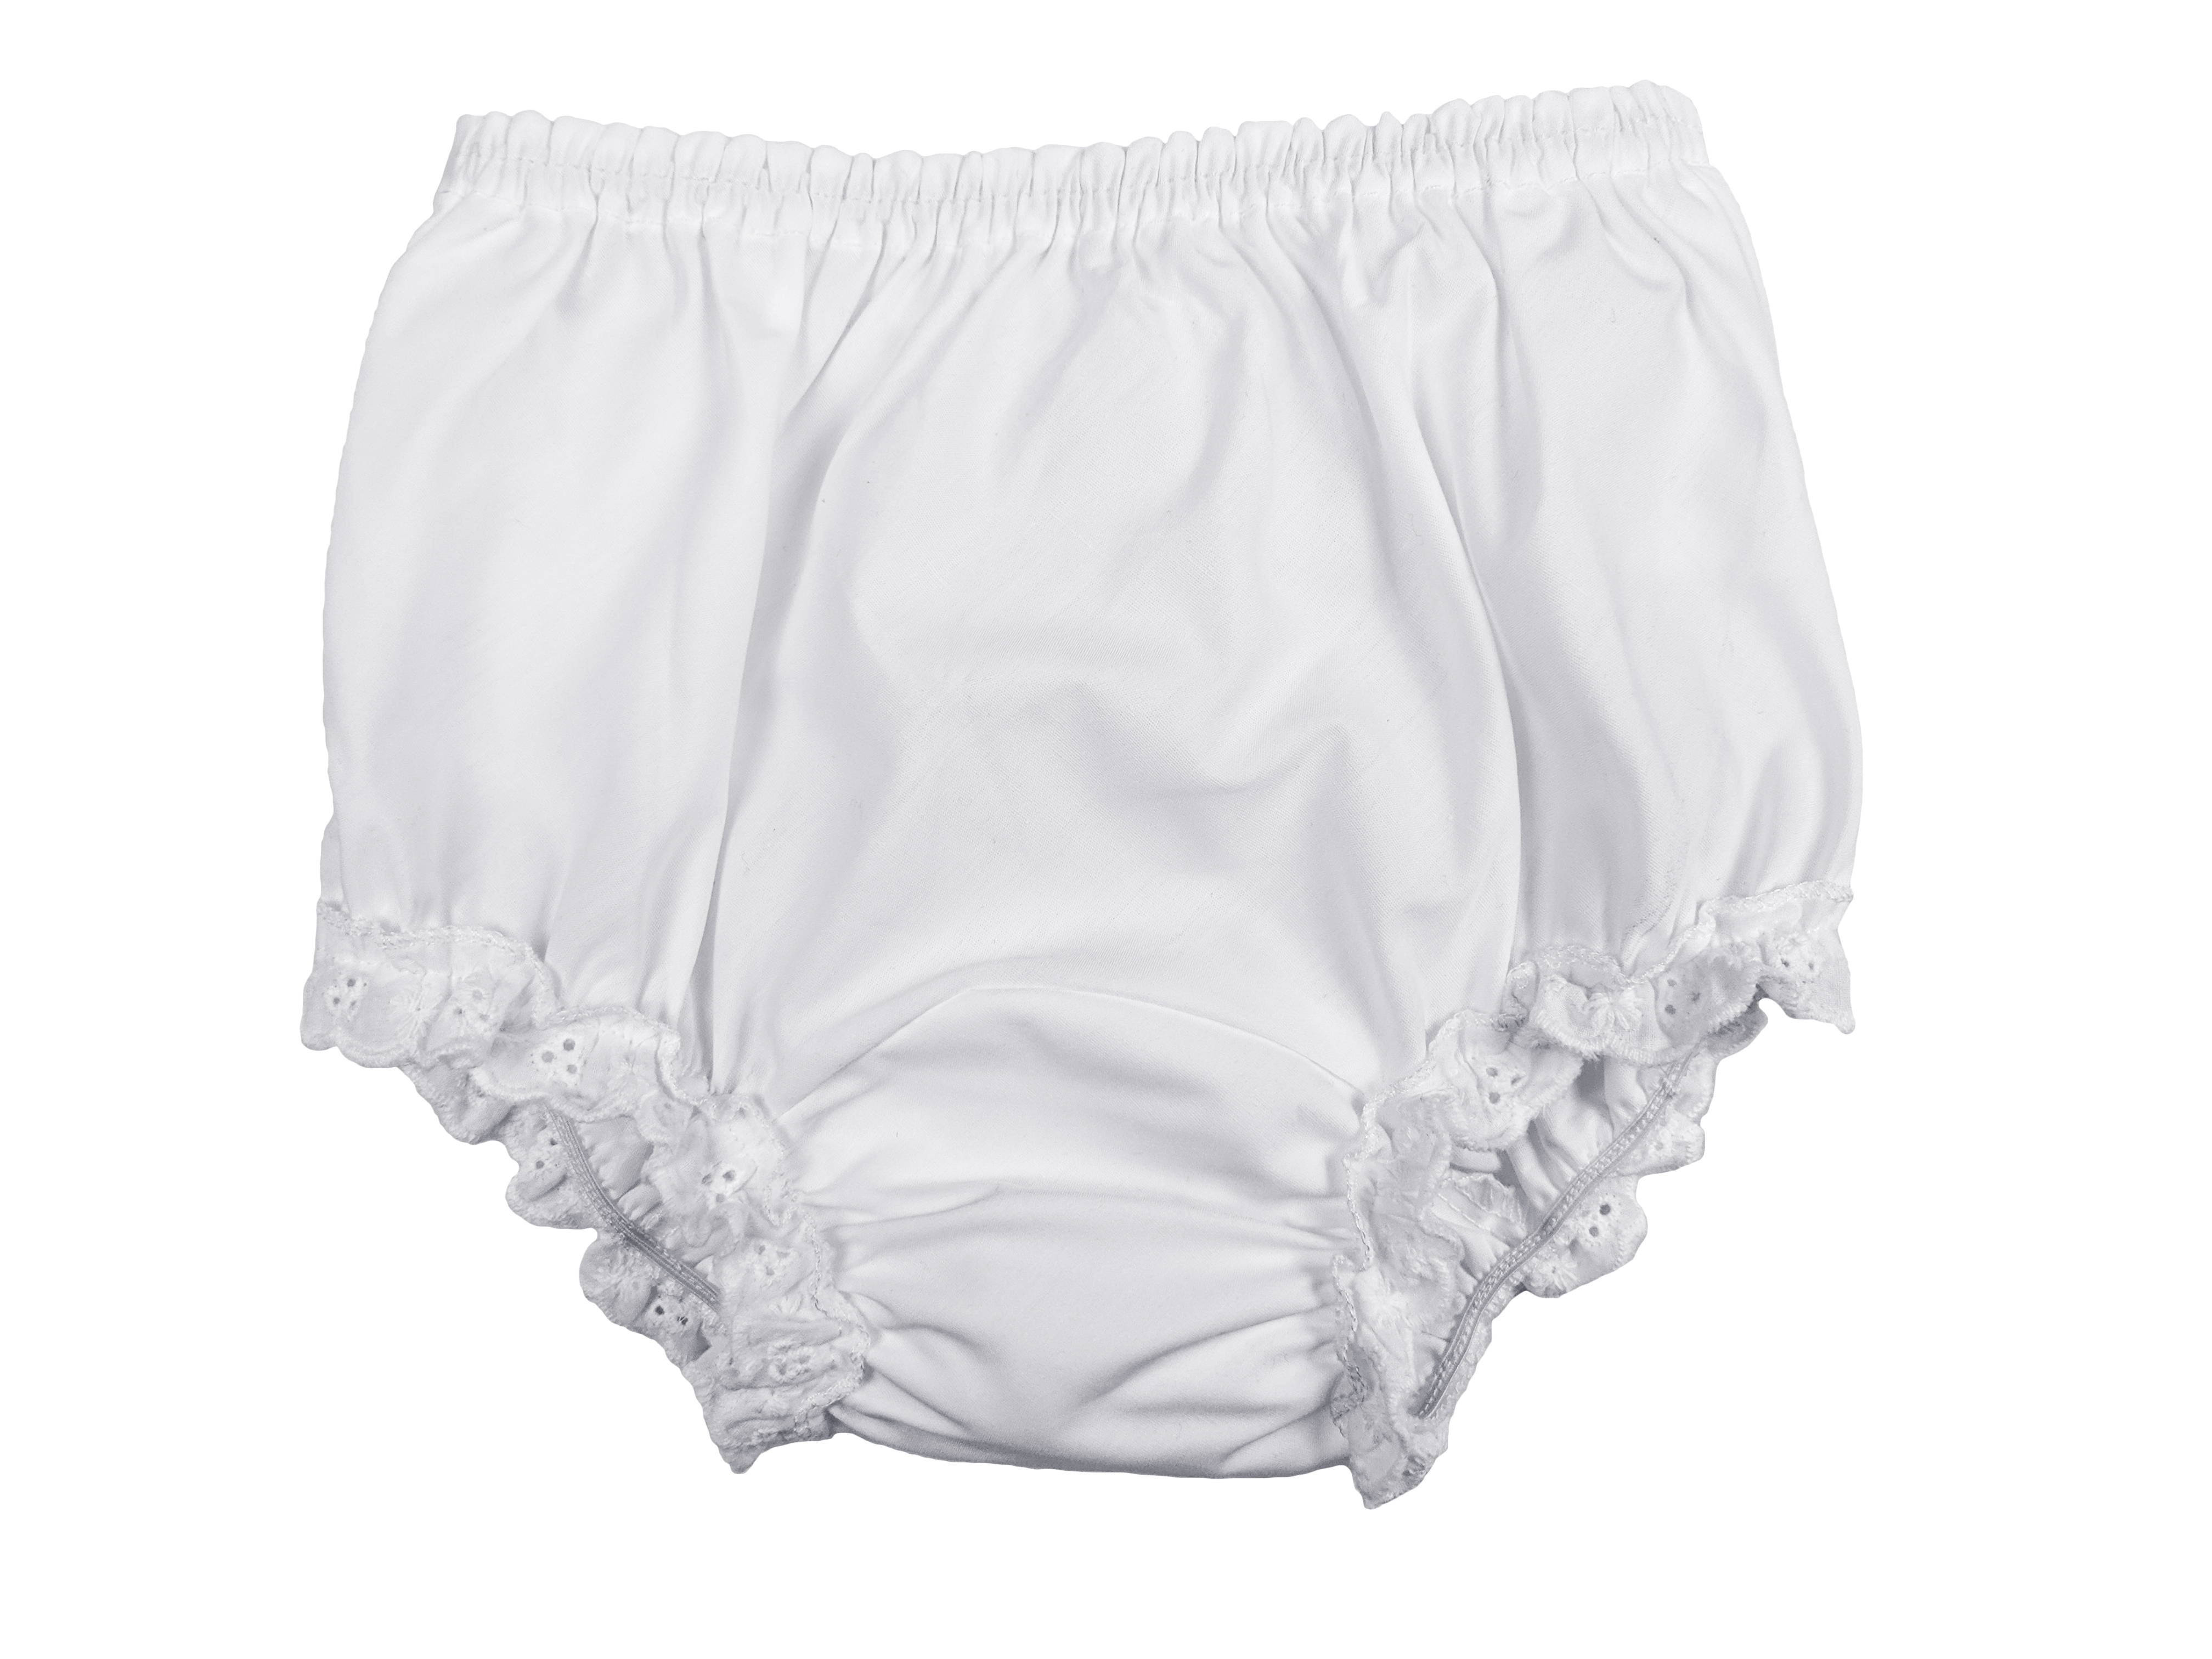 Baby Girls White Elastic Bloomer Diaper Cover with Embroidered Eyelet Edging Around Legs - Little Things Mean a Lot